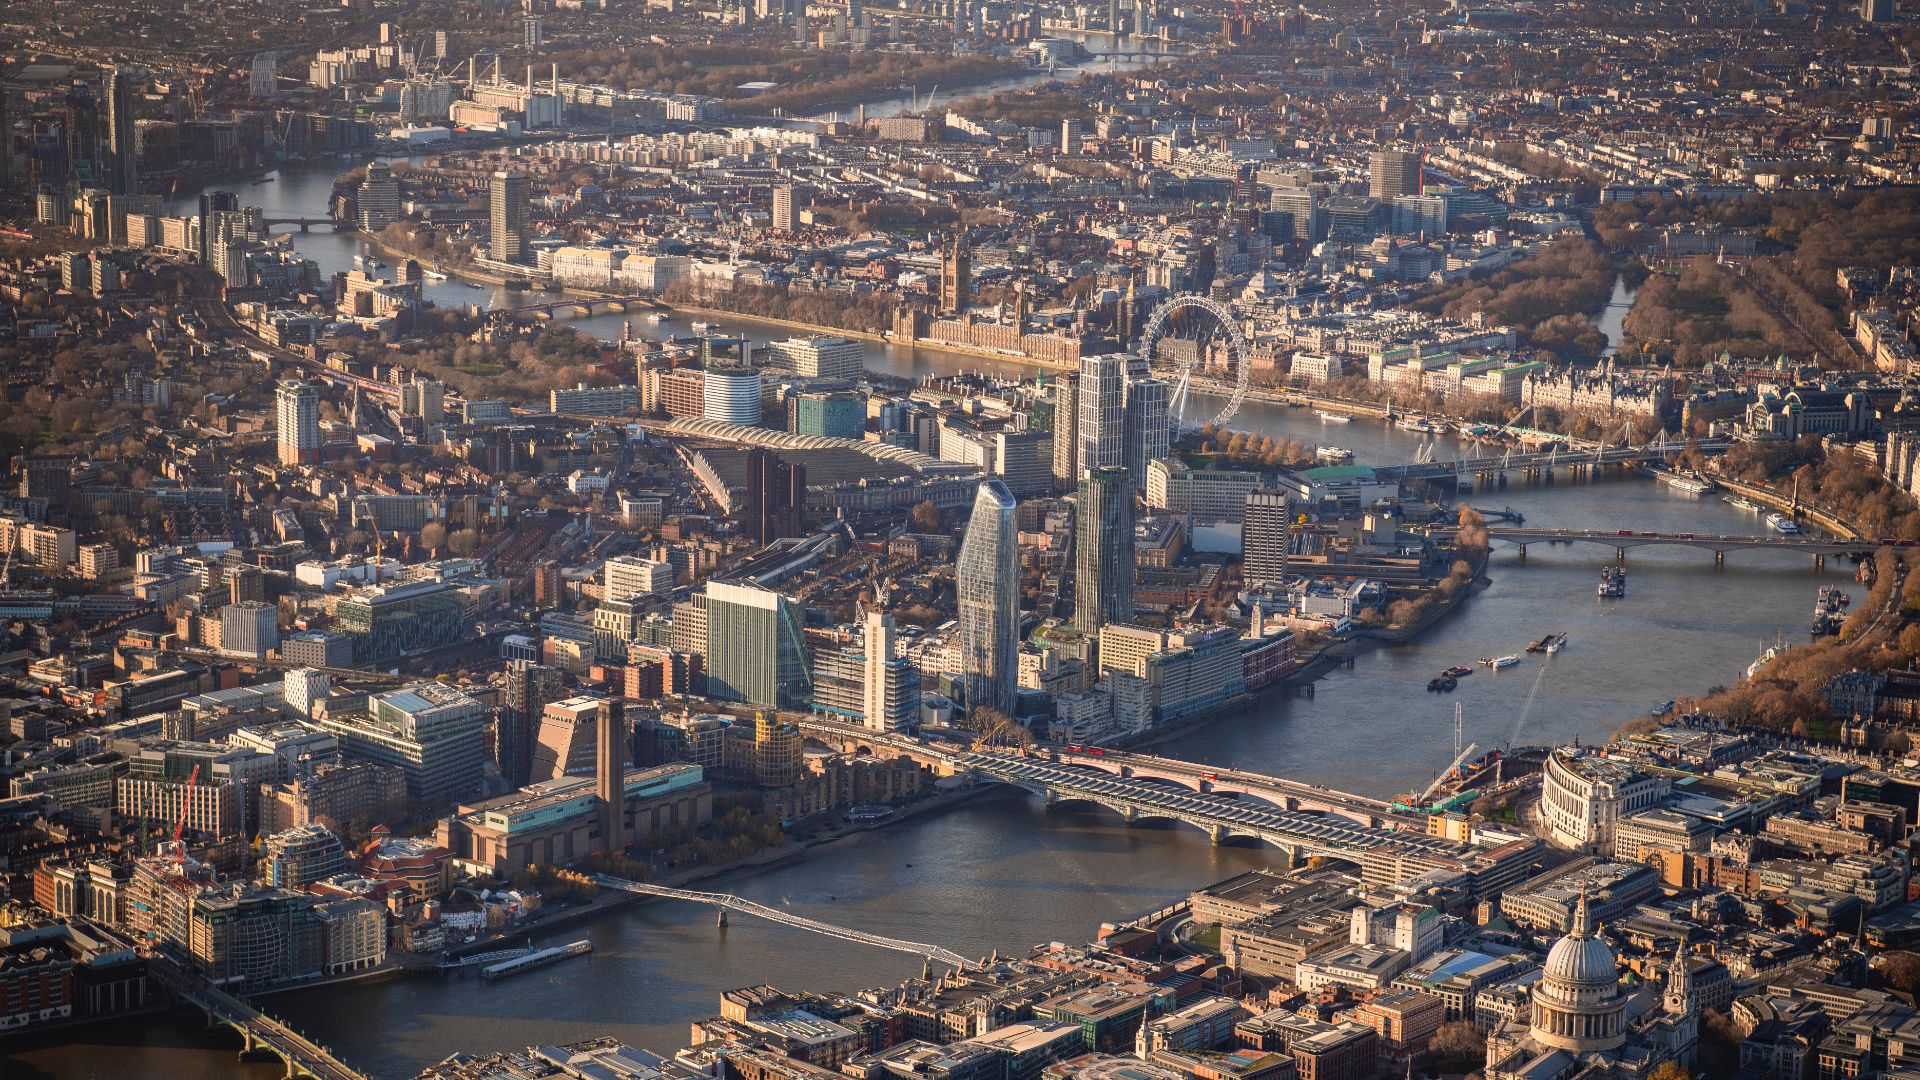 An aerial view of One Millennium Bridge in the heart of London at dusk